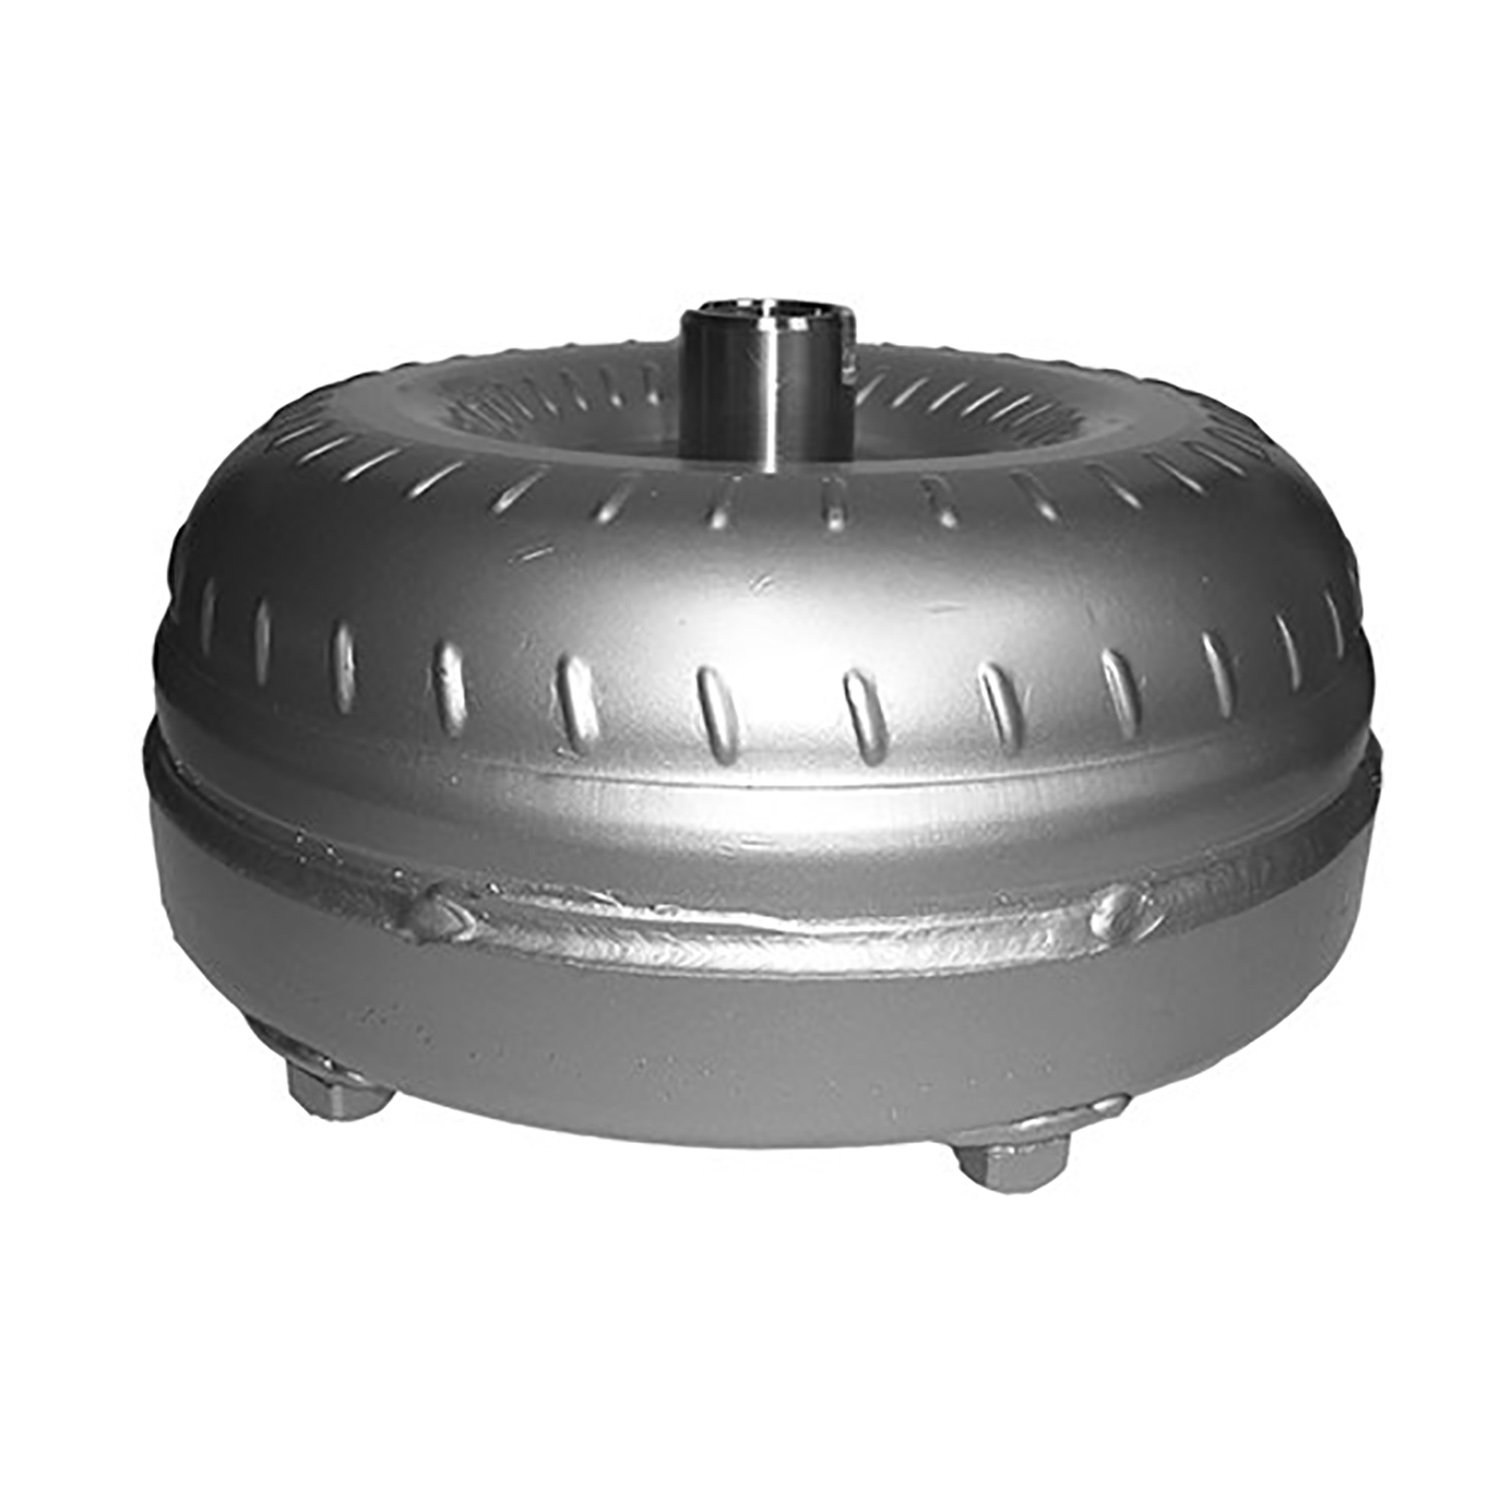 Remanufactured Automatic Transmission Torque Converter for Chrysler 46RE/H, 47RE 93-03 5.9